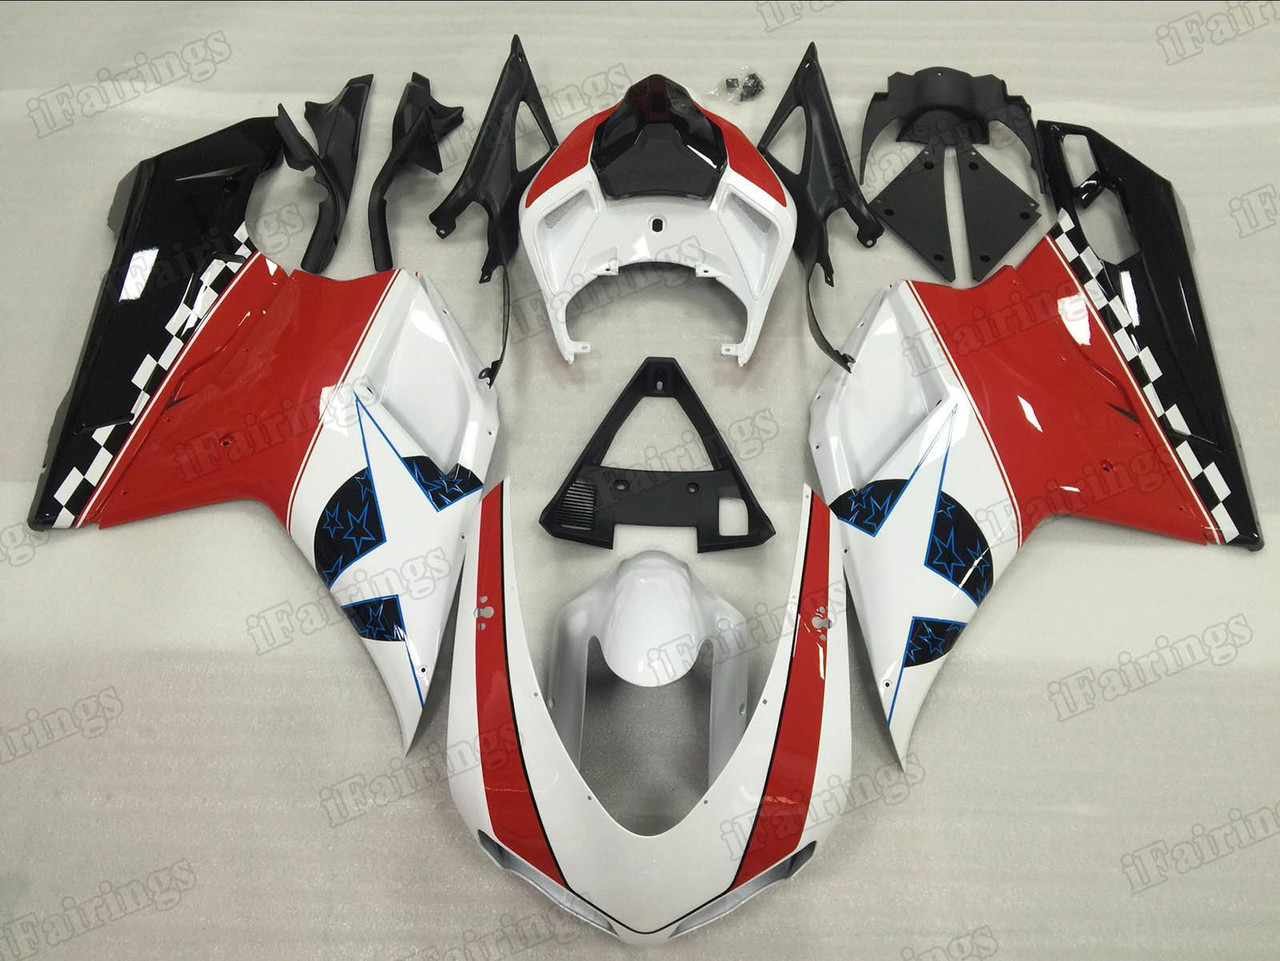 Motorcycle fairings/bodywork for Ducati 848/1098/1198 Nicky Hayden replica scheme. - Click Image to Close